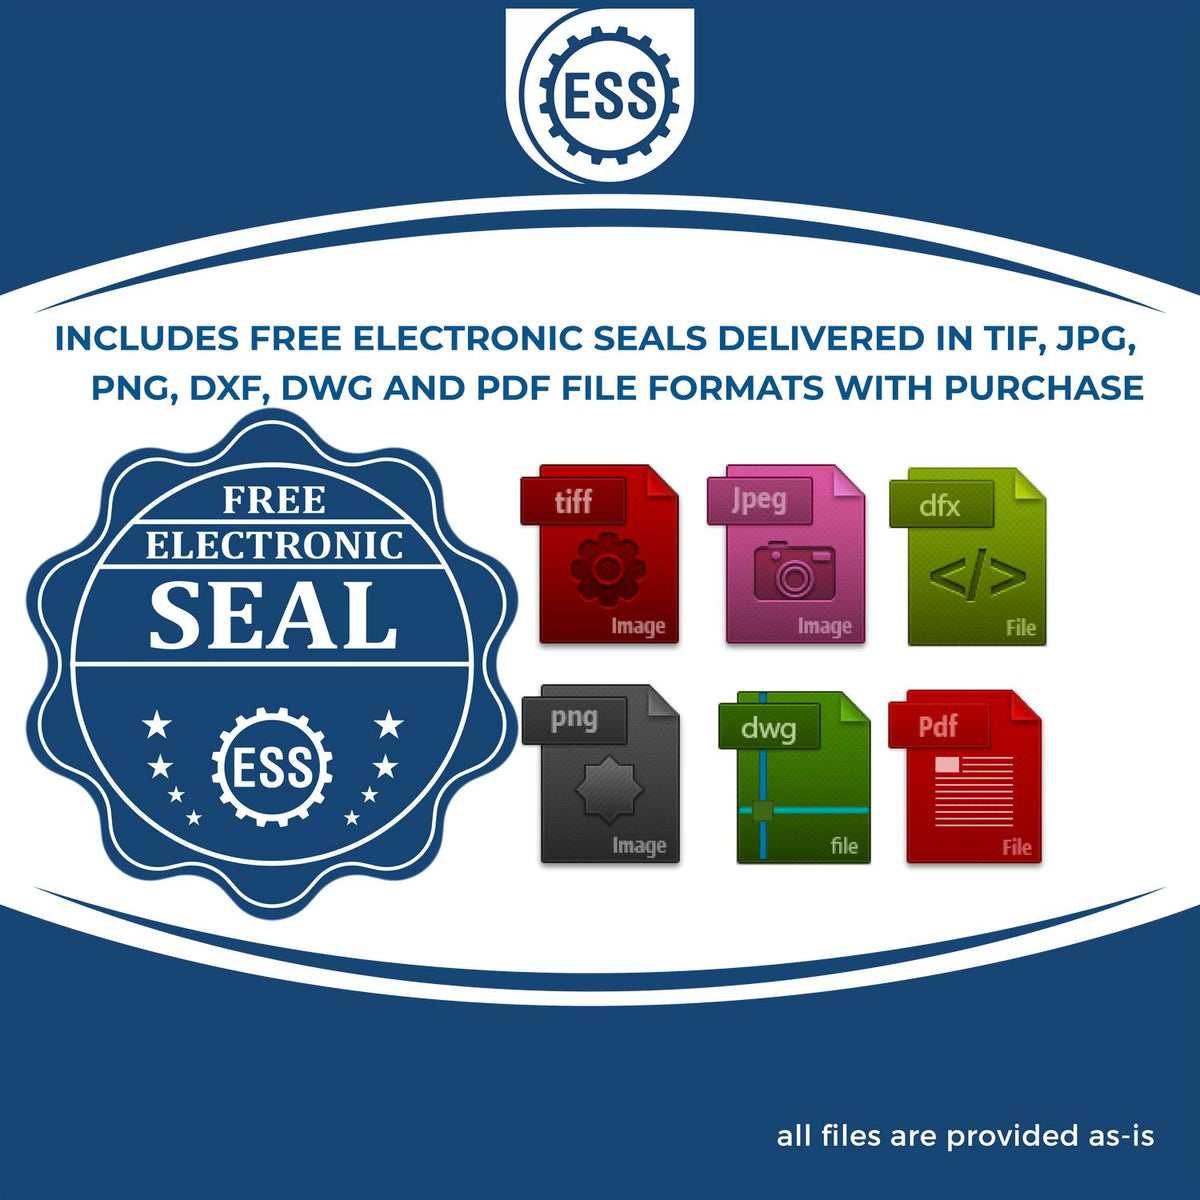 An infographic for the free electronic seal for the Gift Nevada Engineer Seal illustrating the different file type icons such as DXF, DWG, TIF, JPG and PNG.